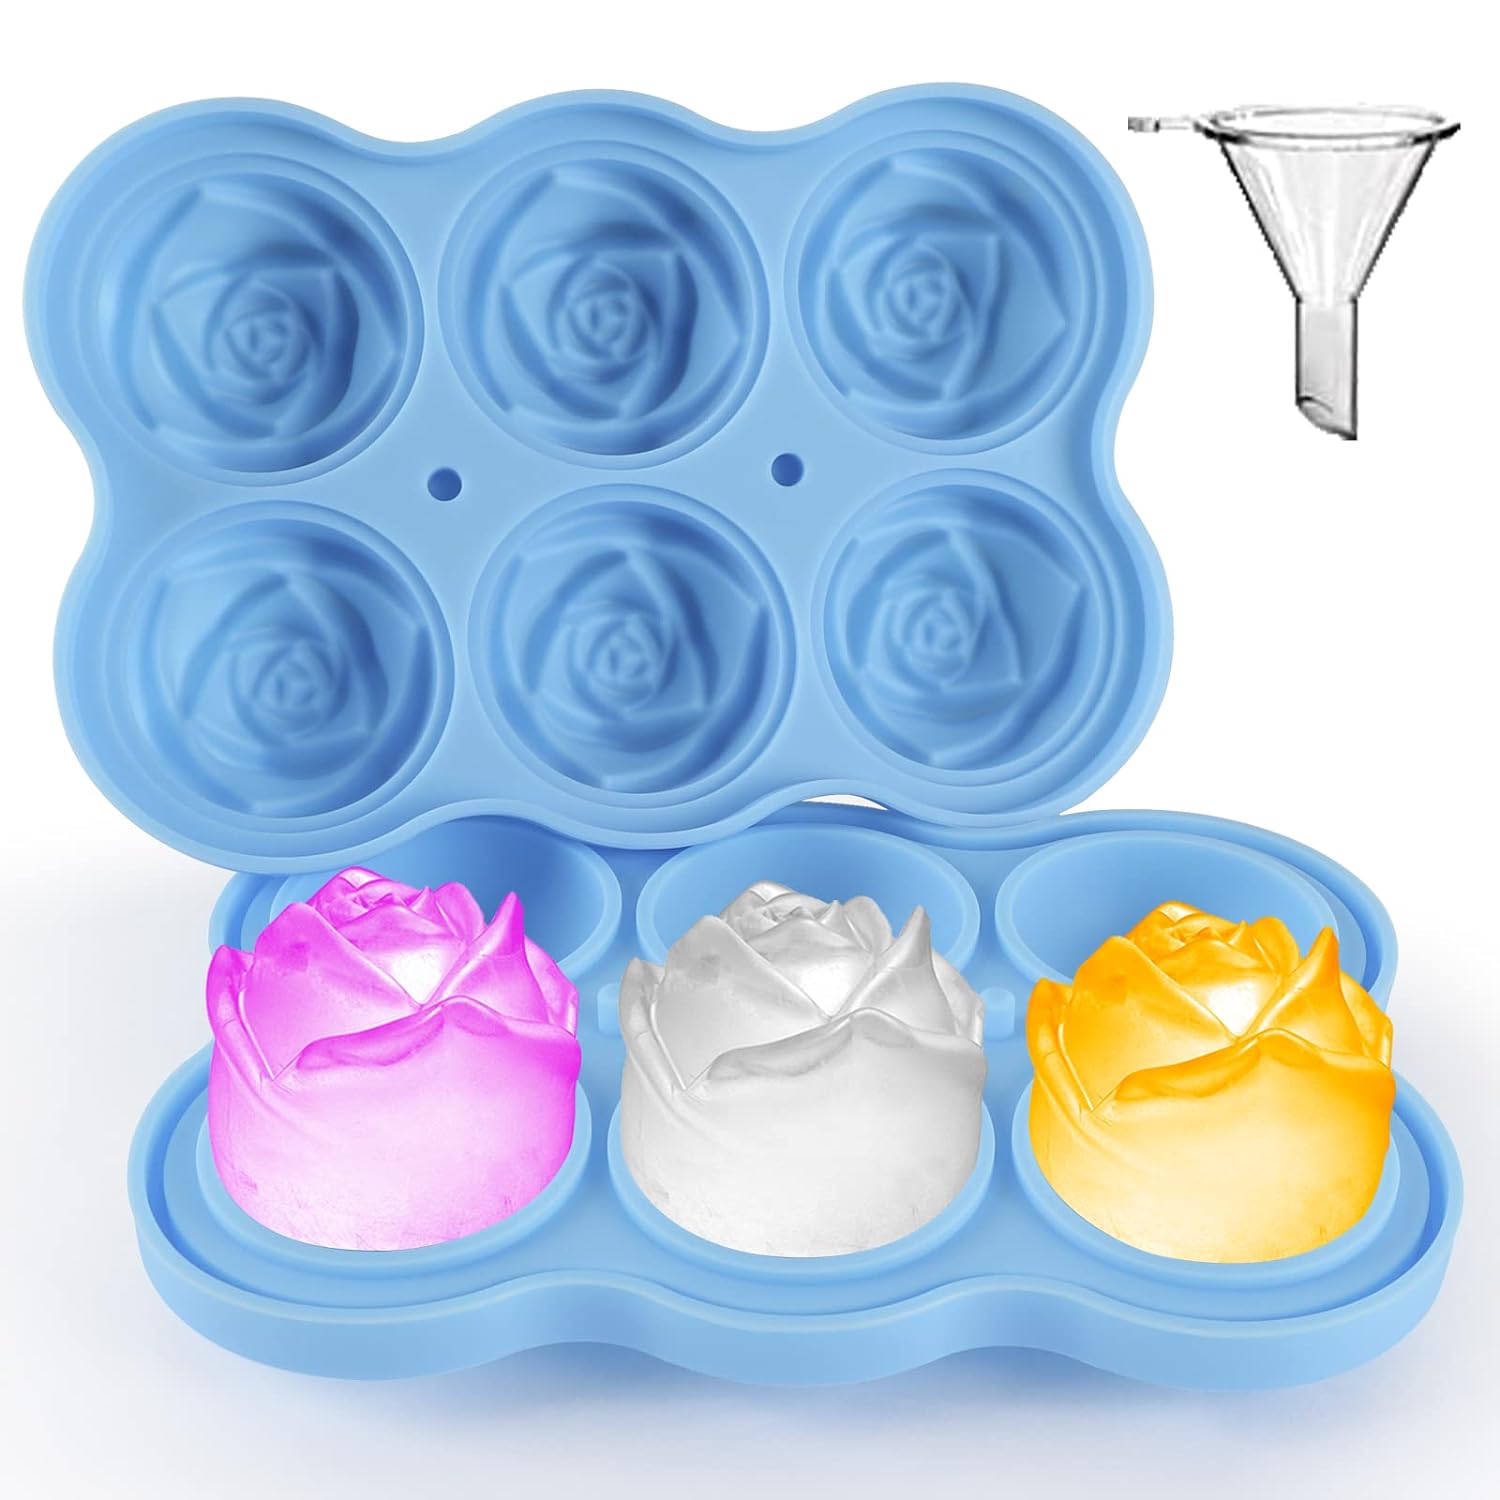 Great Choice Products Ice Cube Tray, Rose Ice Cube Trays, 6 Cavity Silicone Rose Ice Ball Maker, Easy Release Large Ice Cube Form For Chilling C…